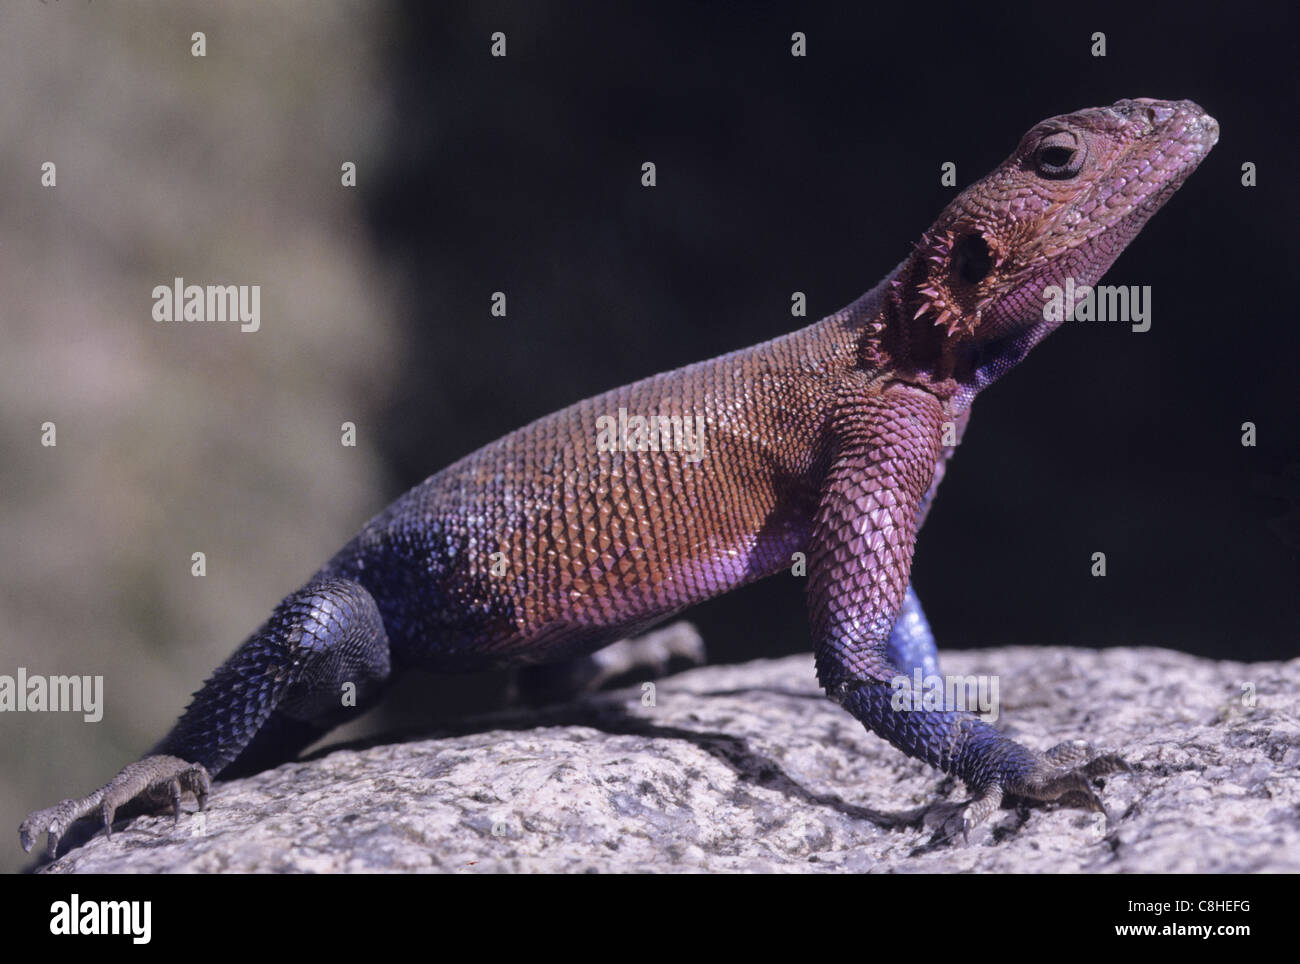 Agame Agama agama, rock, animal, Tanzania, Africa Banque D'Images